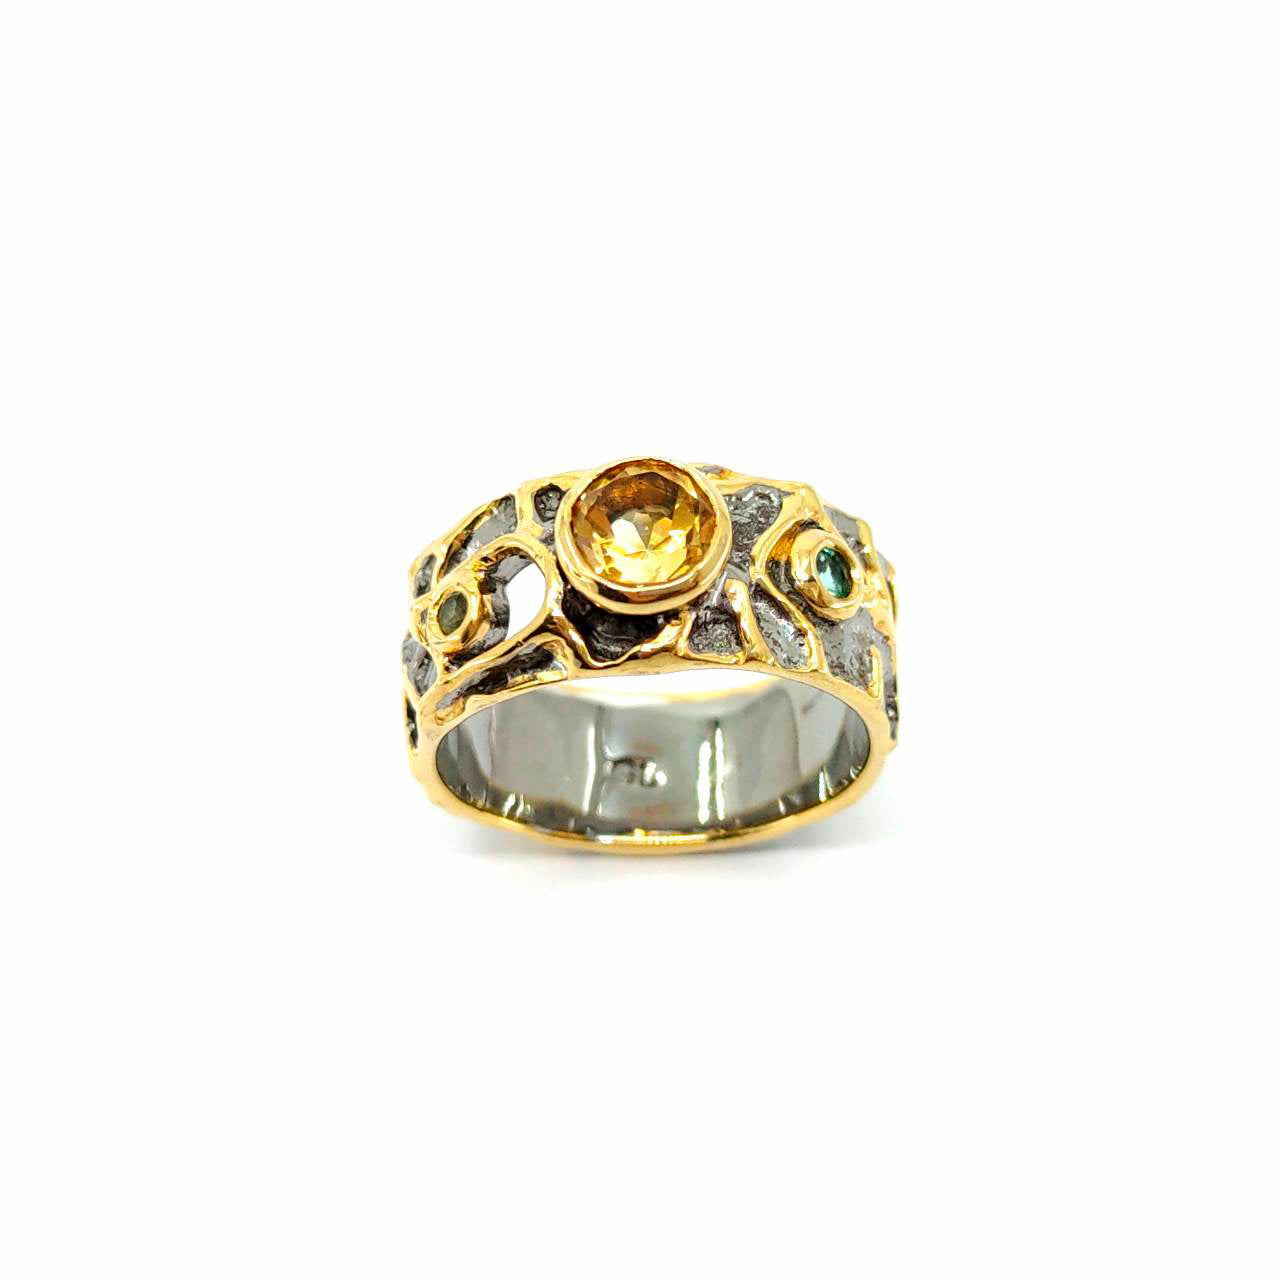 Alice - 925 Sterling Silver Ring, Decorated with Citrine, Emerald and Peridot, Plated with 3 Micron 22K Yellow Gold and Grey Ruthenium